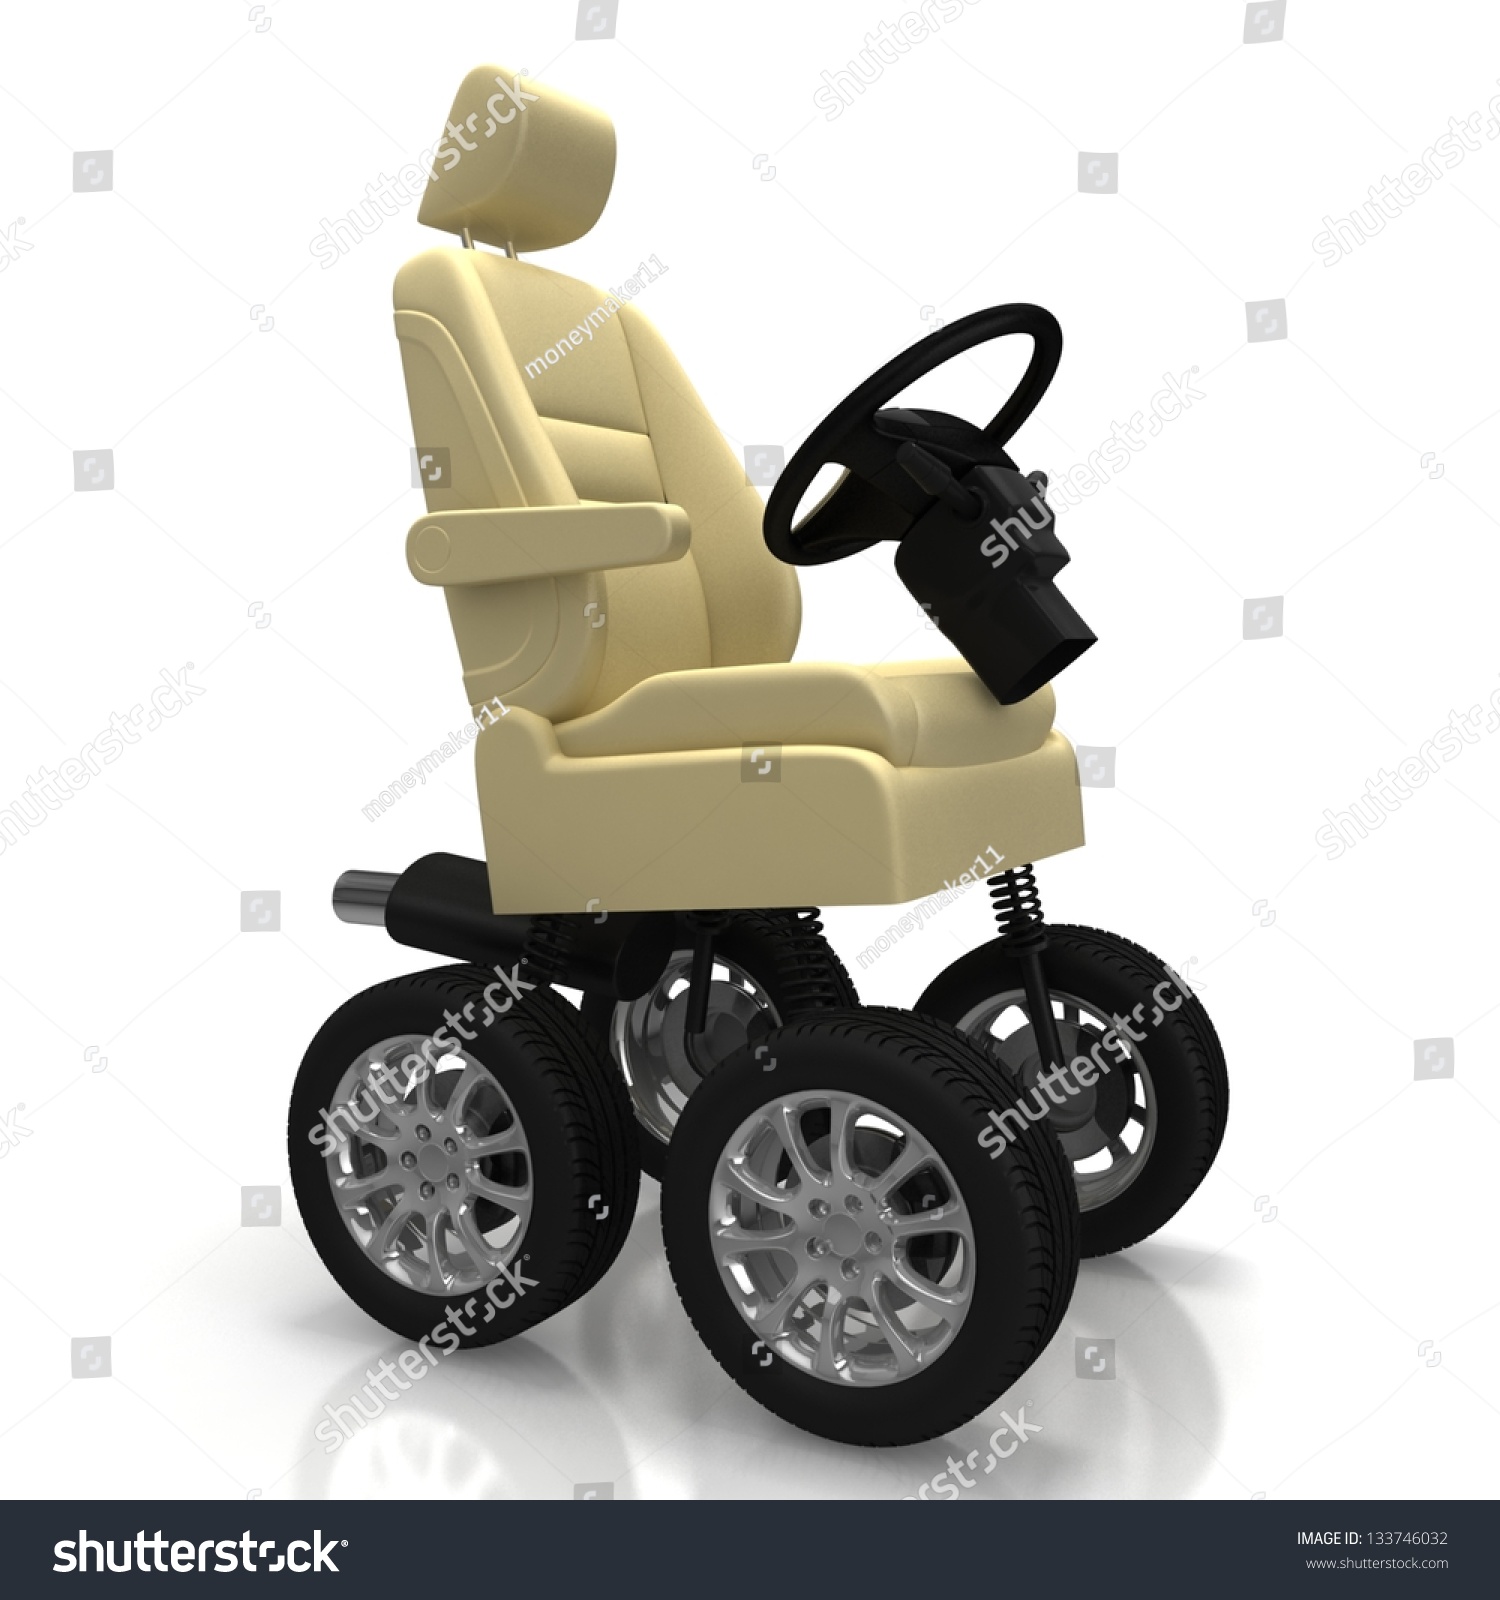 car seat with wheels